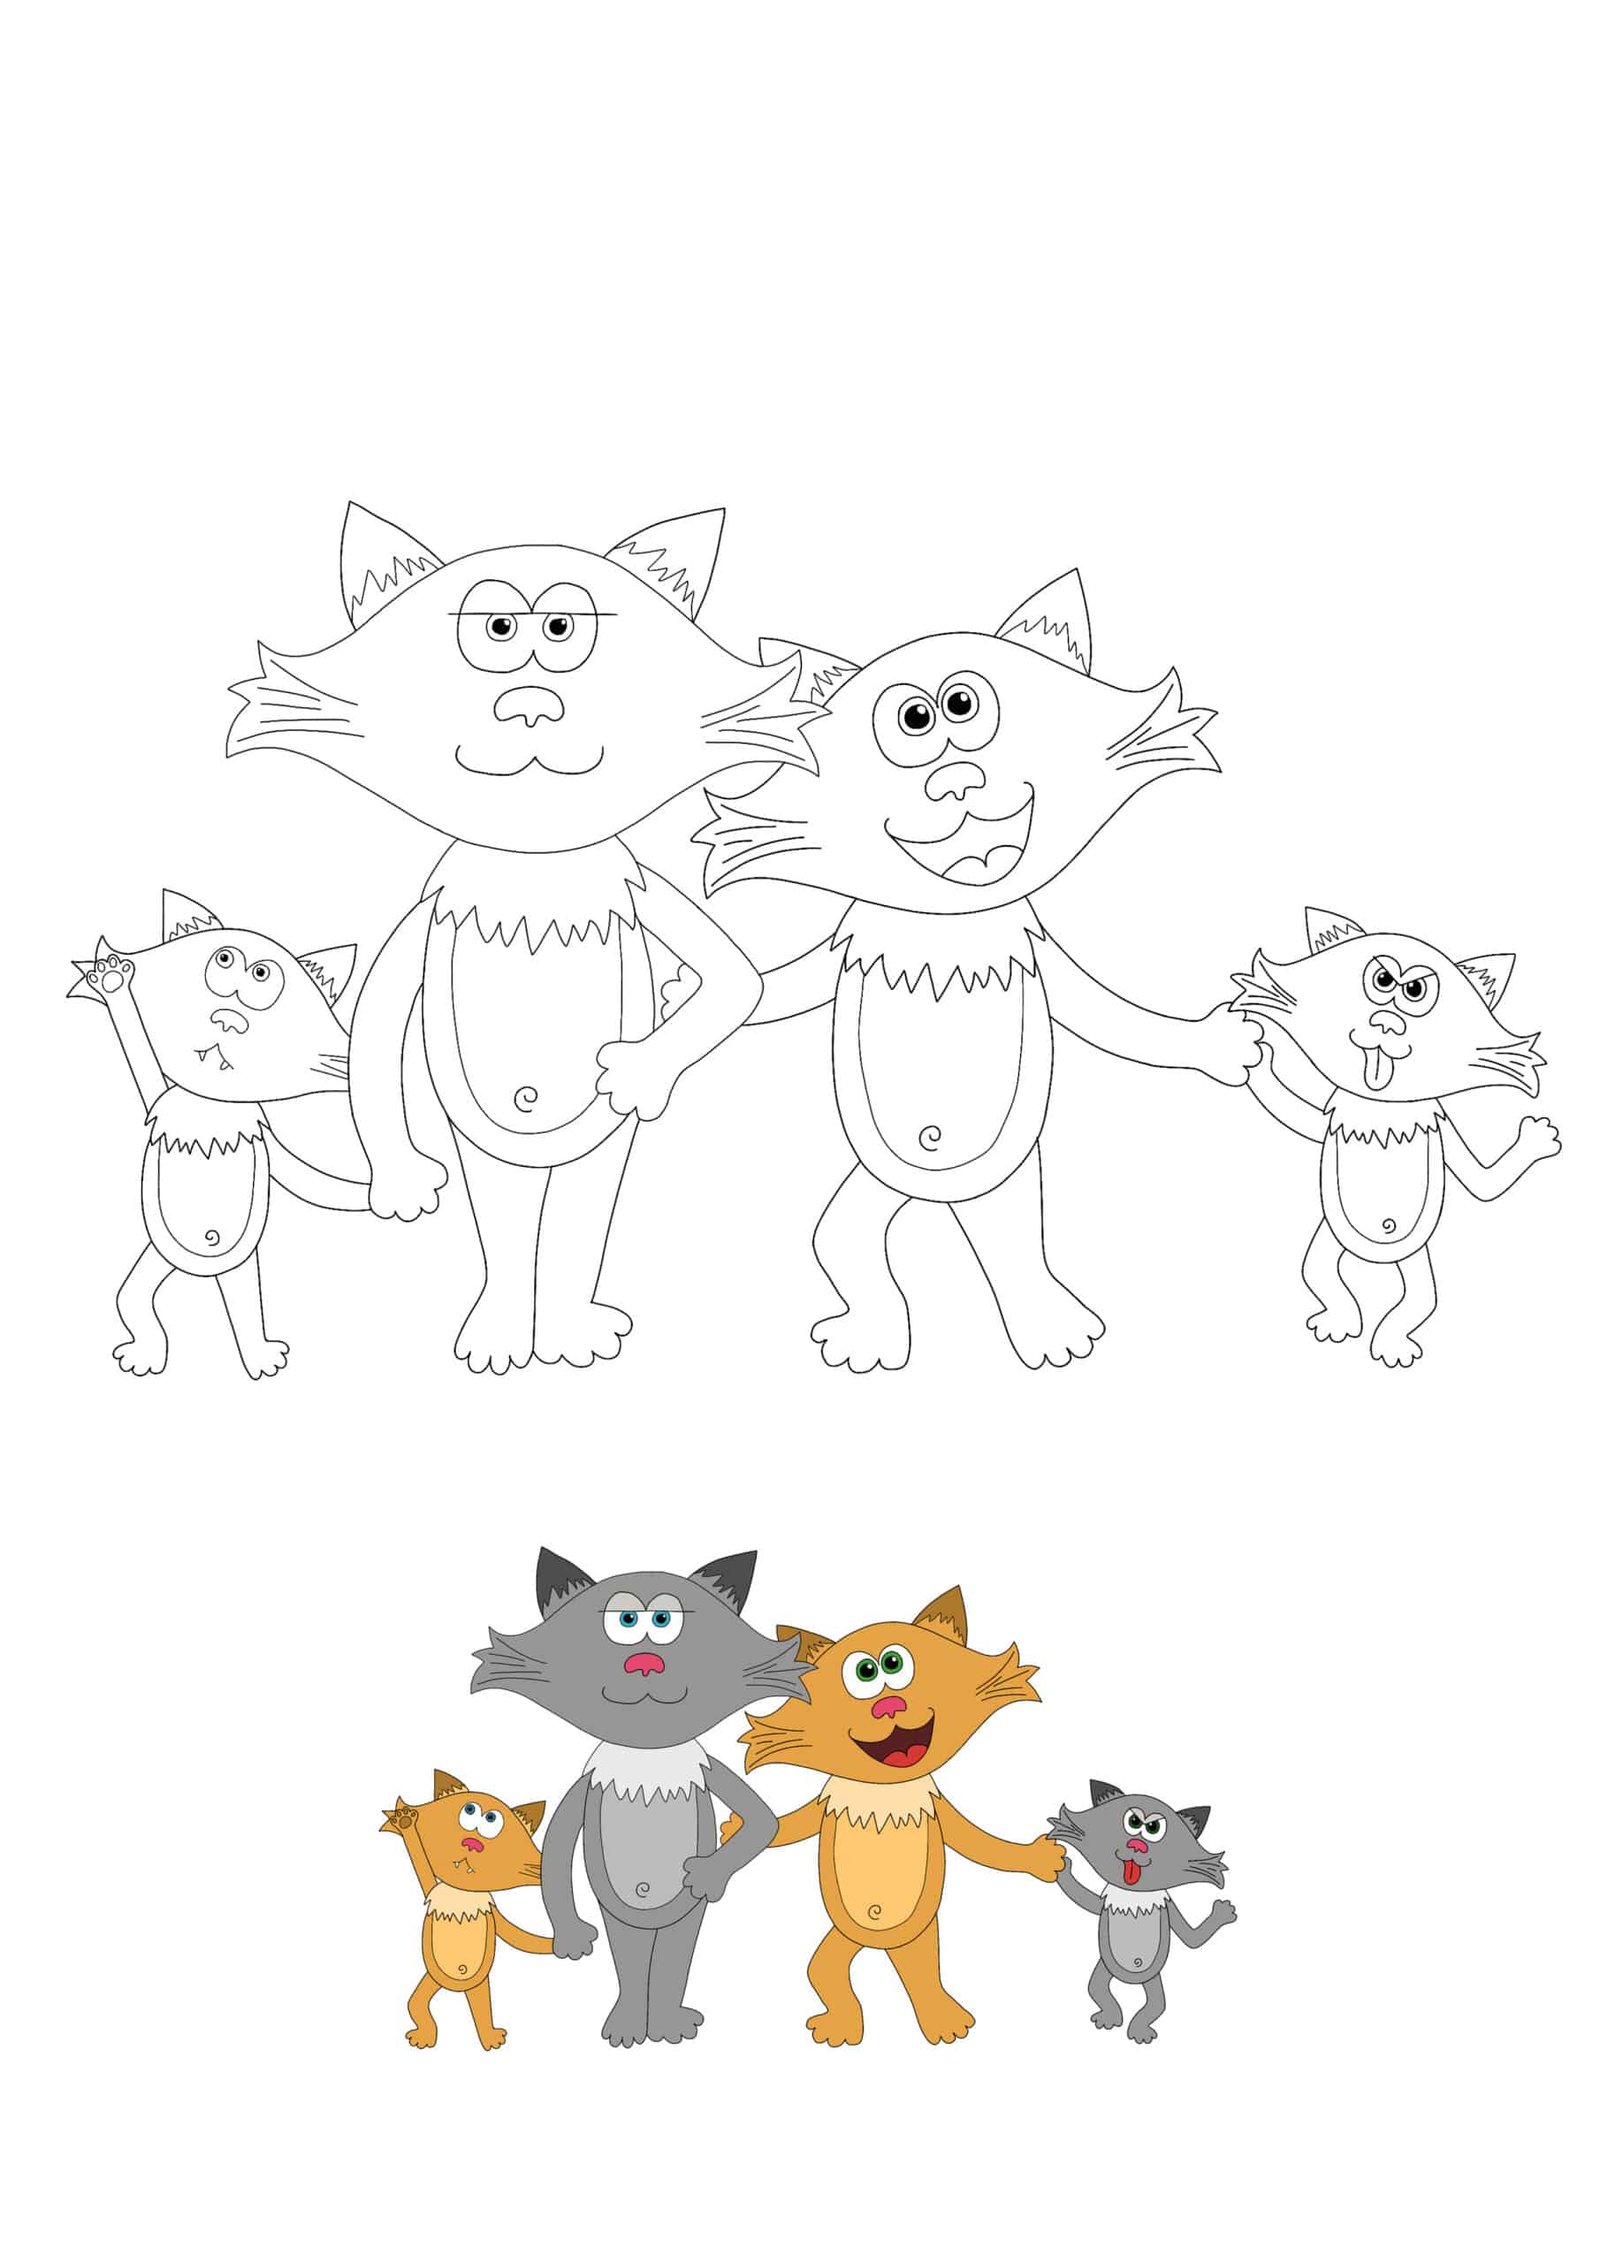 Cat Family printable coloring page for kids